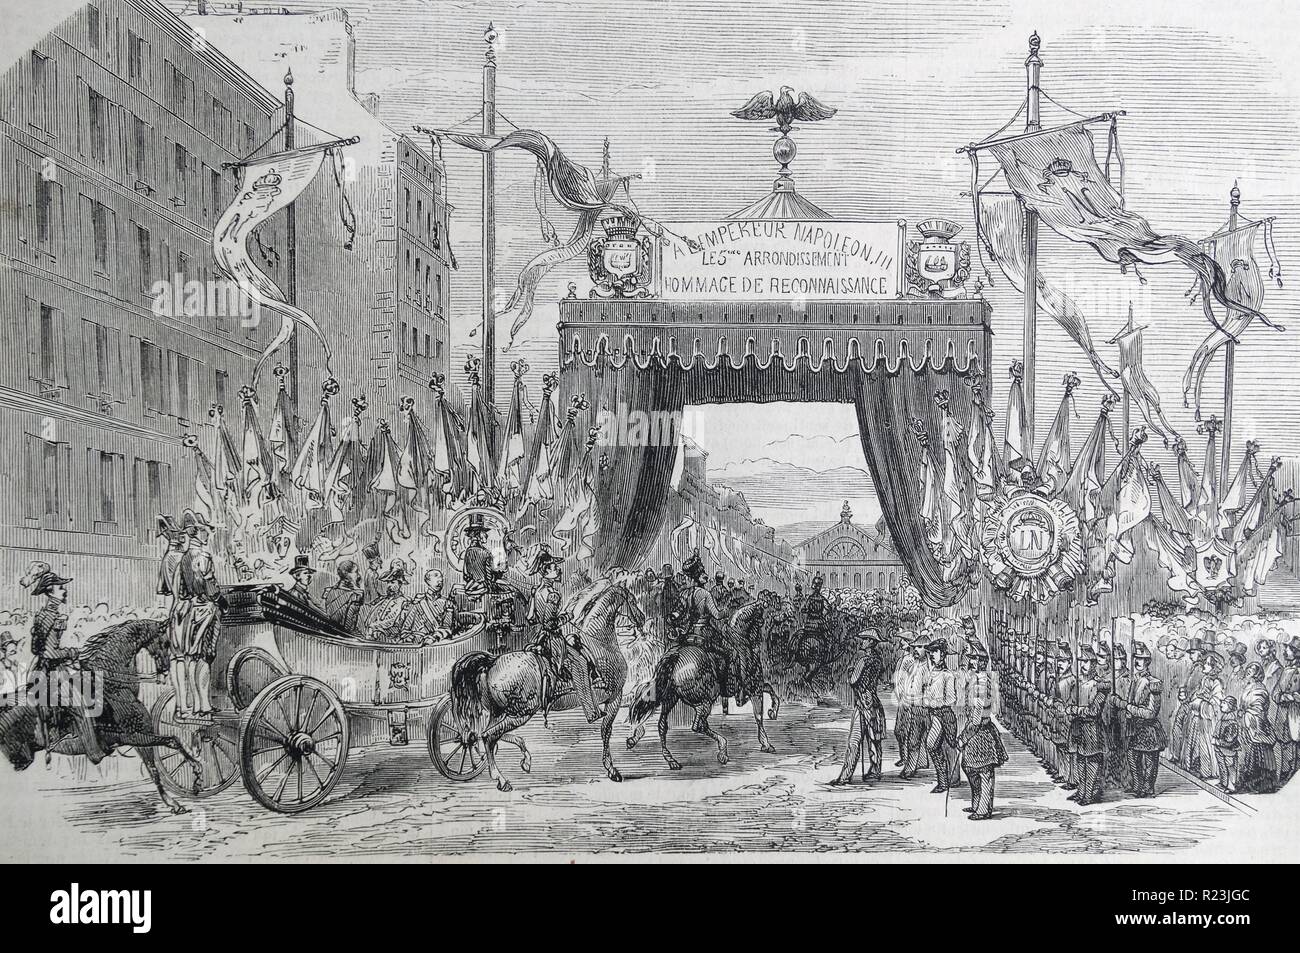 Woodcut depicting the Inauguration of the boulevard de Strasbourg hosting the celebration of Napoleon III being appointed to Baron Haussmann. Dated 1853 Stock Photo